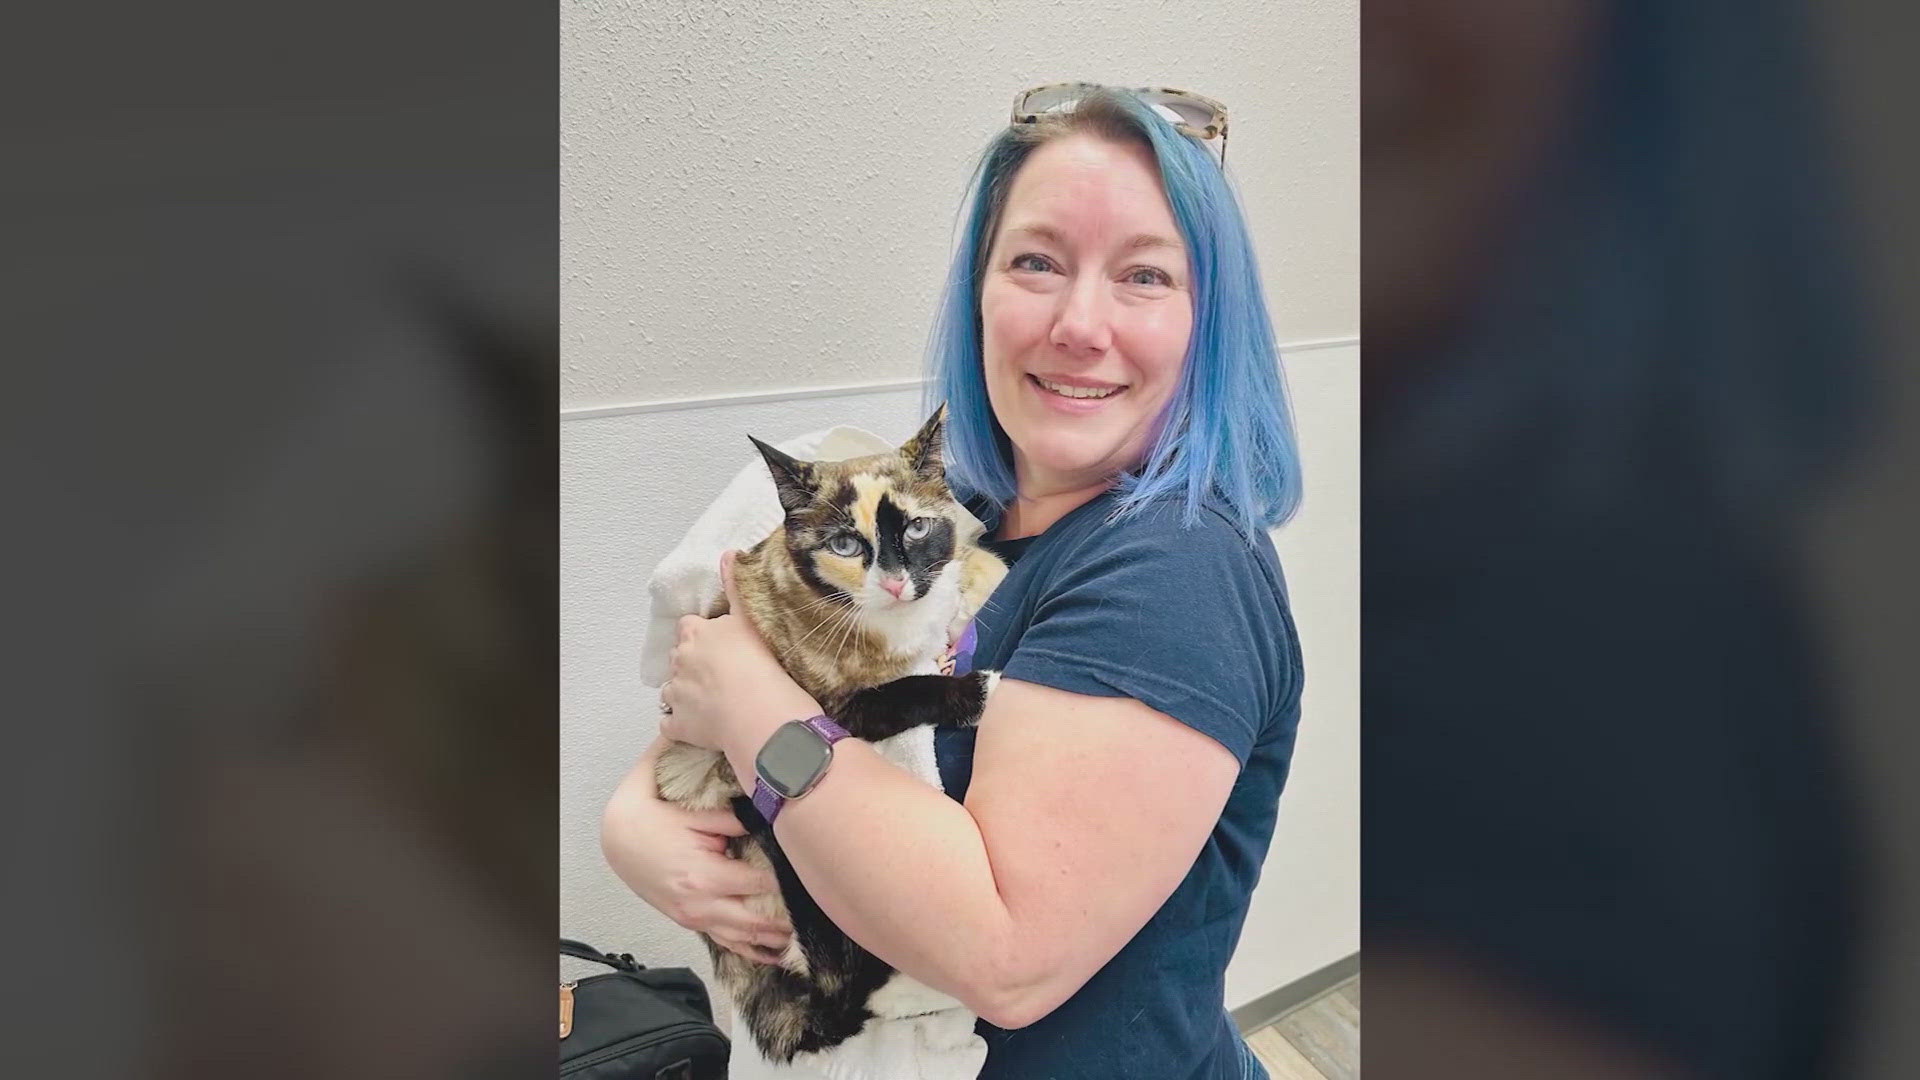 A Utah couple says they packed the box to return some shoes and didn't realize their cat was hiding inside.